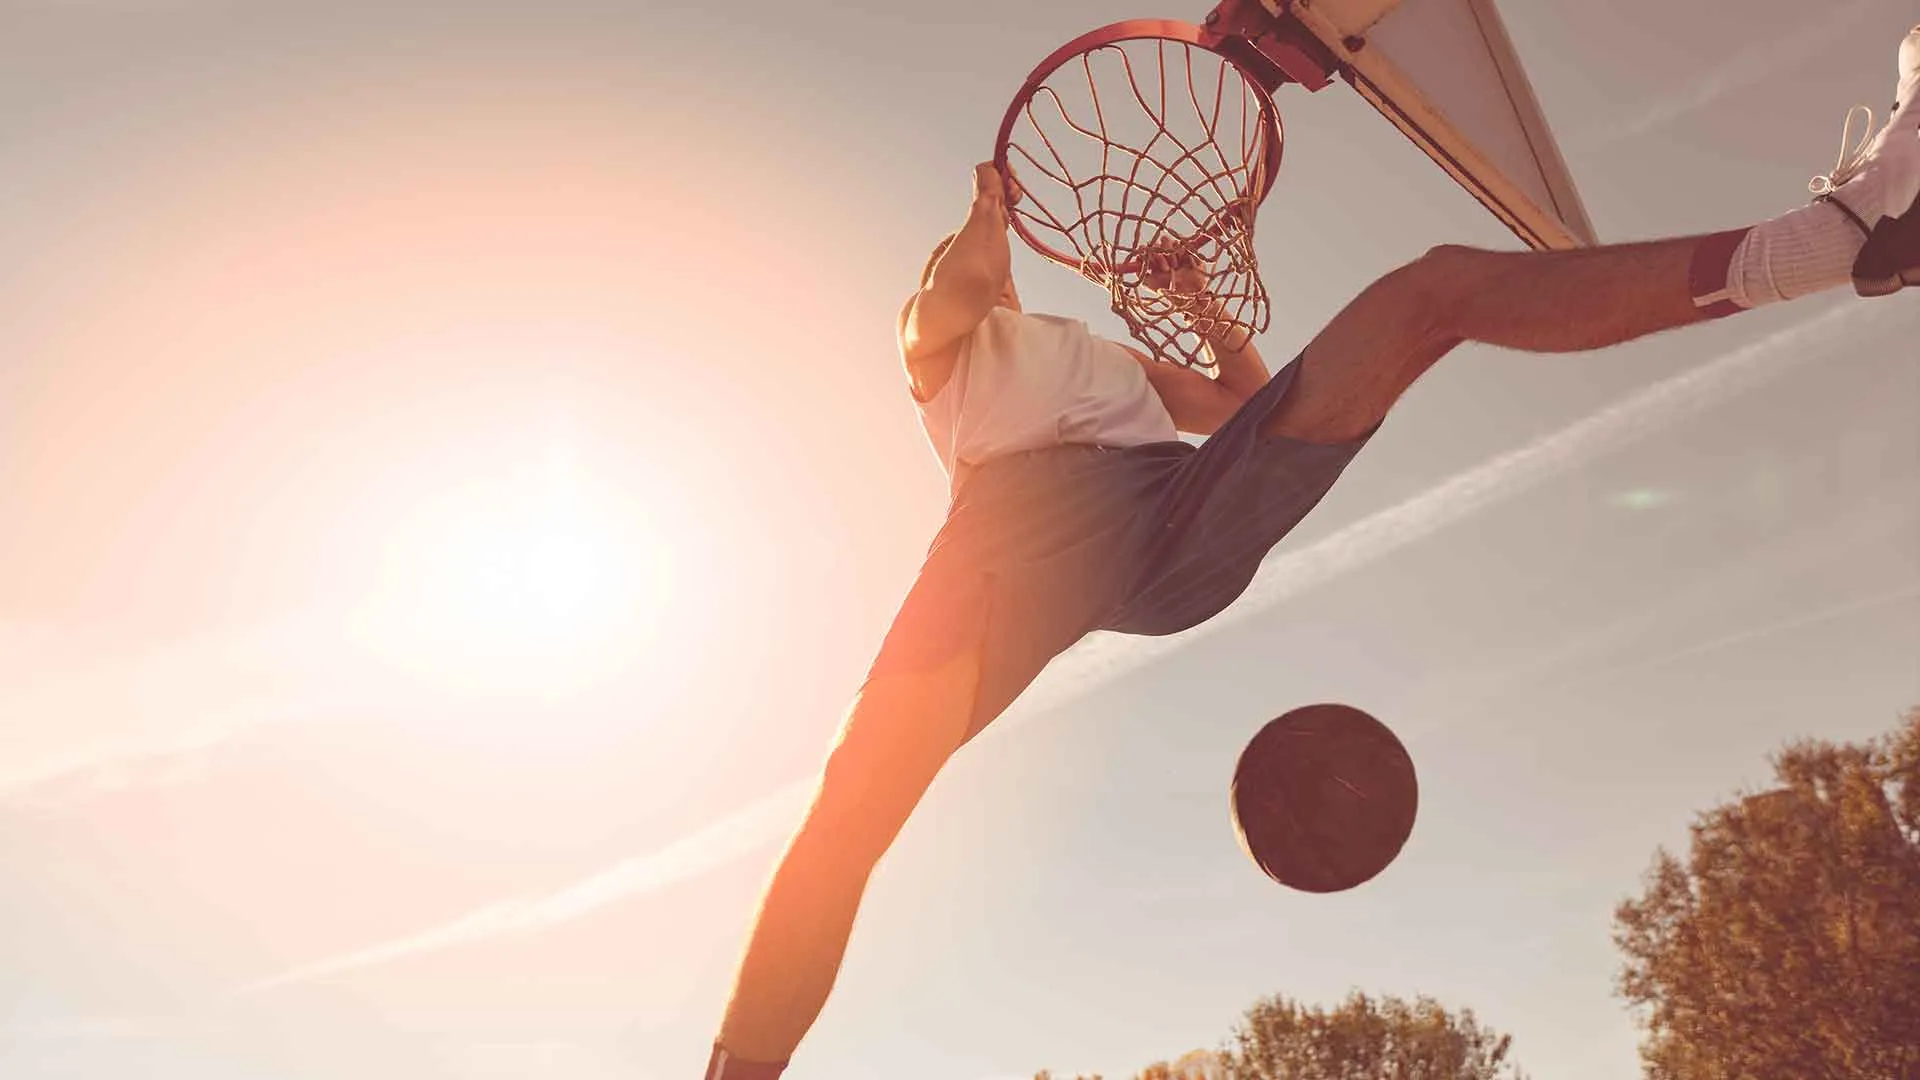 Up view of man basketball dunk under the bright sun